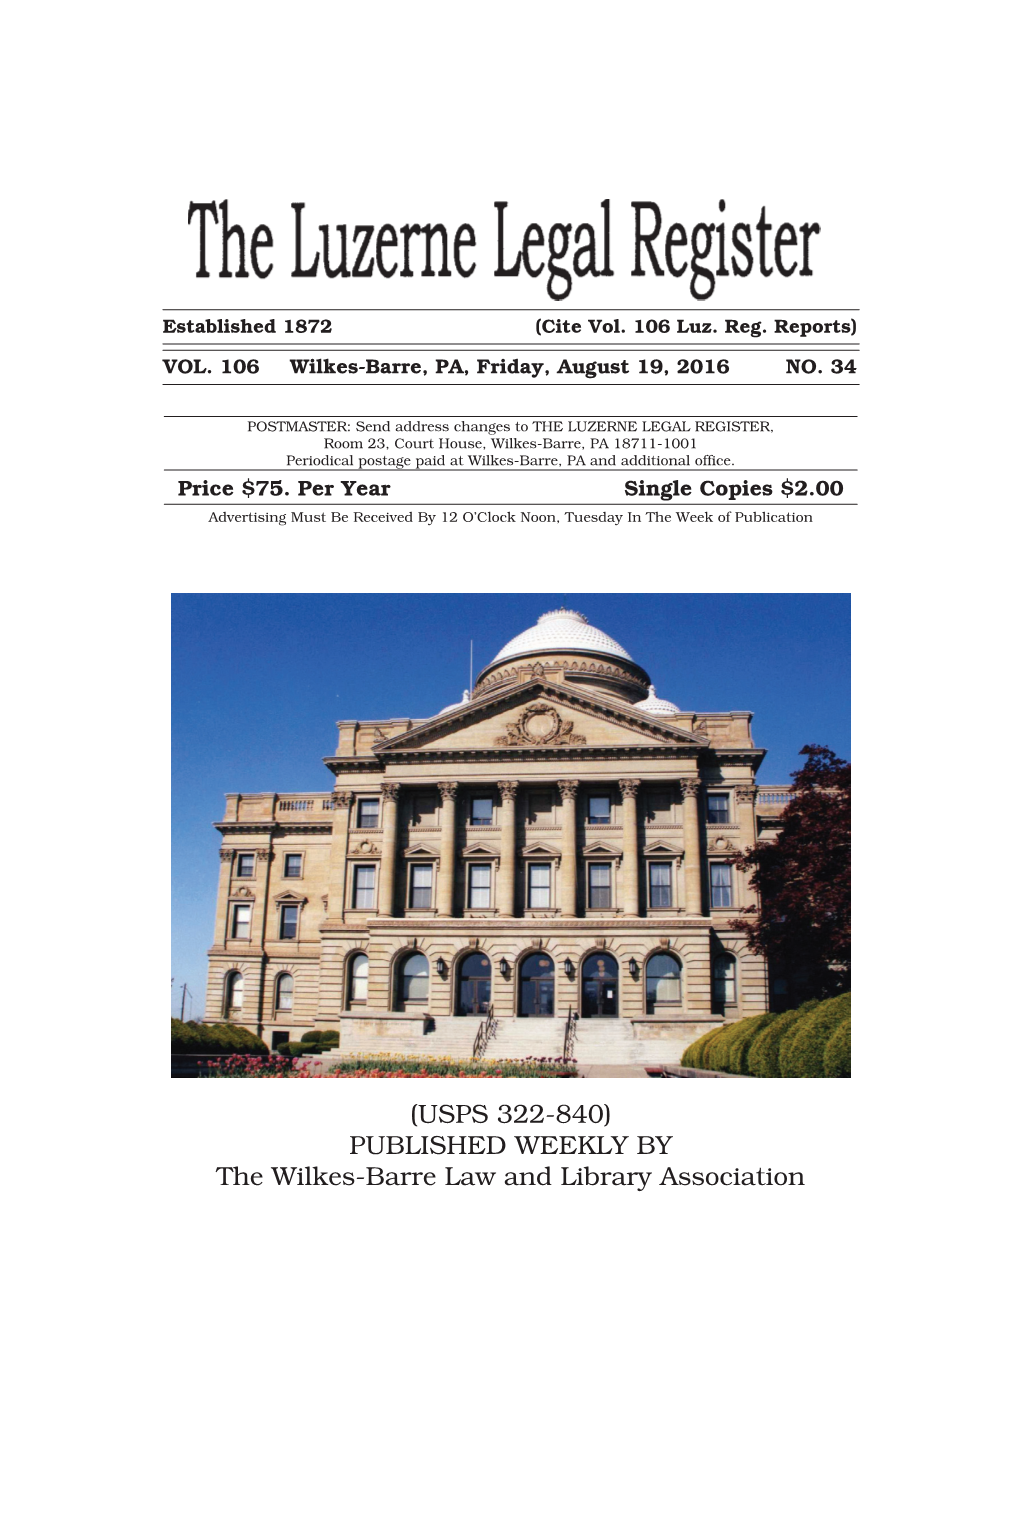 (USPS 322-840) PUBLISHED WEEKLY by the Wilkes-Barre Law and Library Association